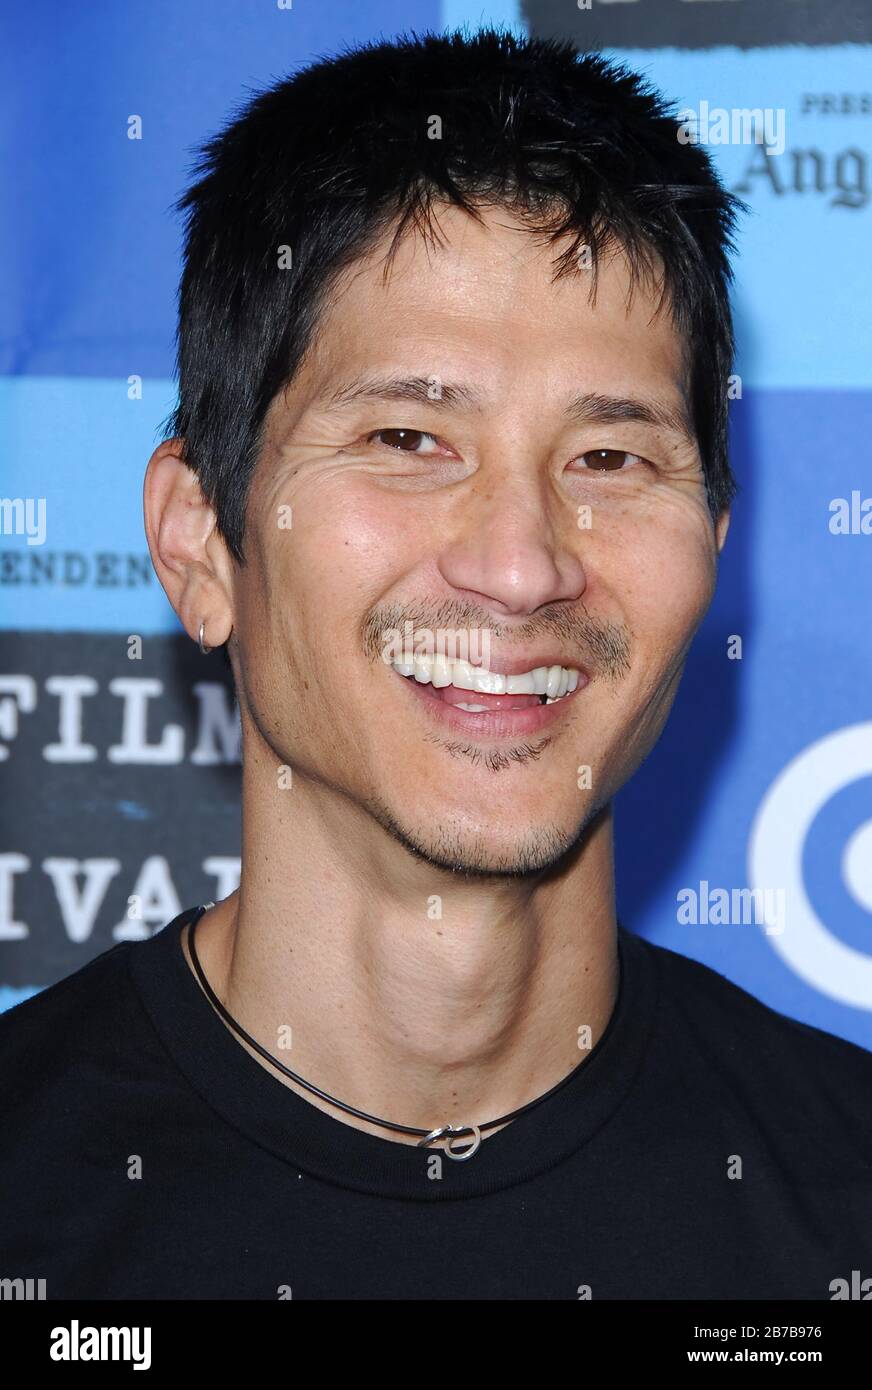 Gregg Araki at the 2006 Los Angeles Film Festival Opening Night - 'The Devil Wears Prada' Premiere held at the Mann Village Theater in Westwood, CA. The event took place on Thursday, June 22, 2006. Photo by: SBM / PictureLux Stock Photo